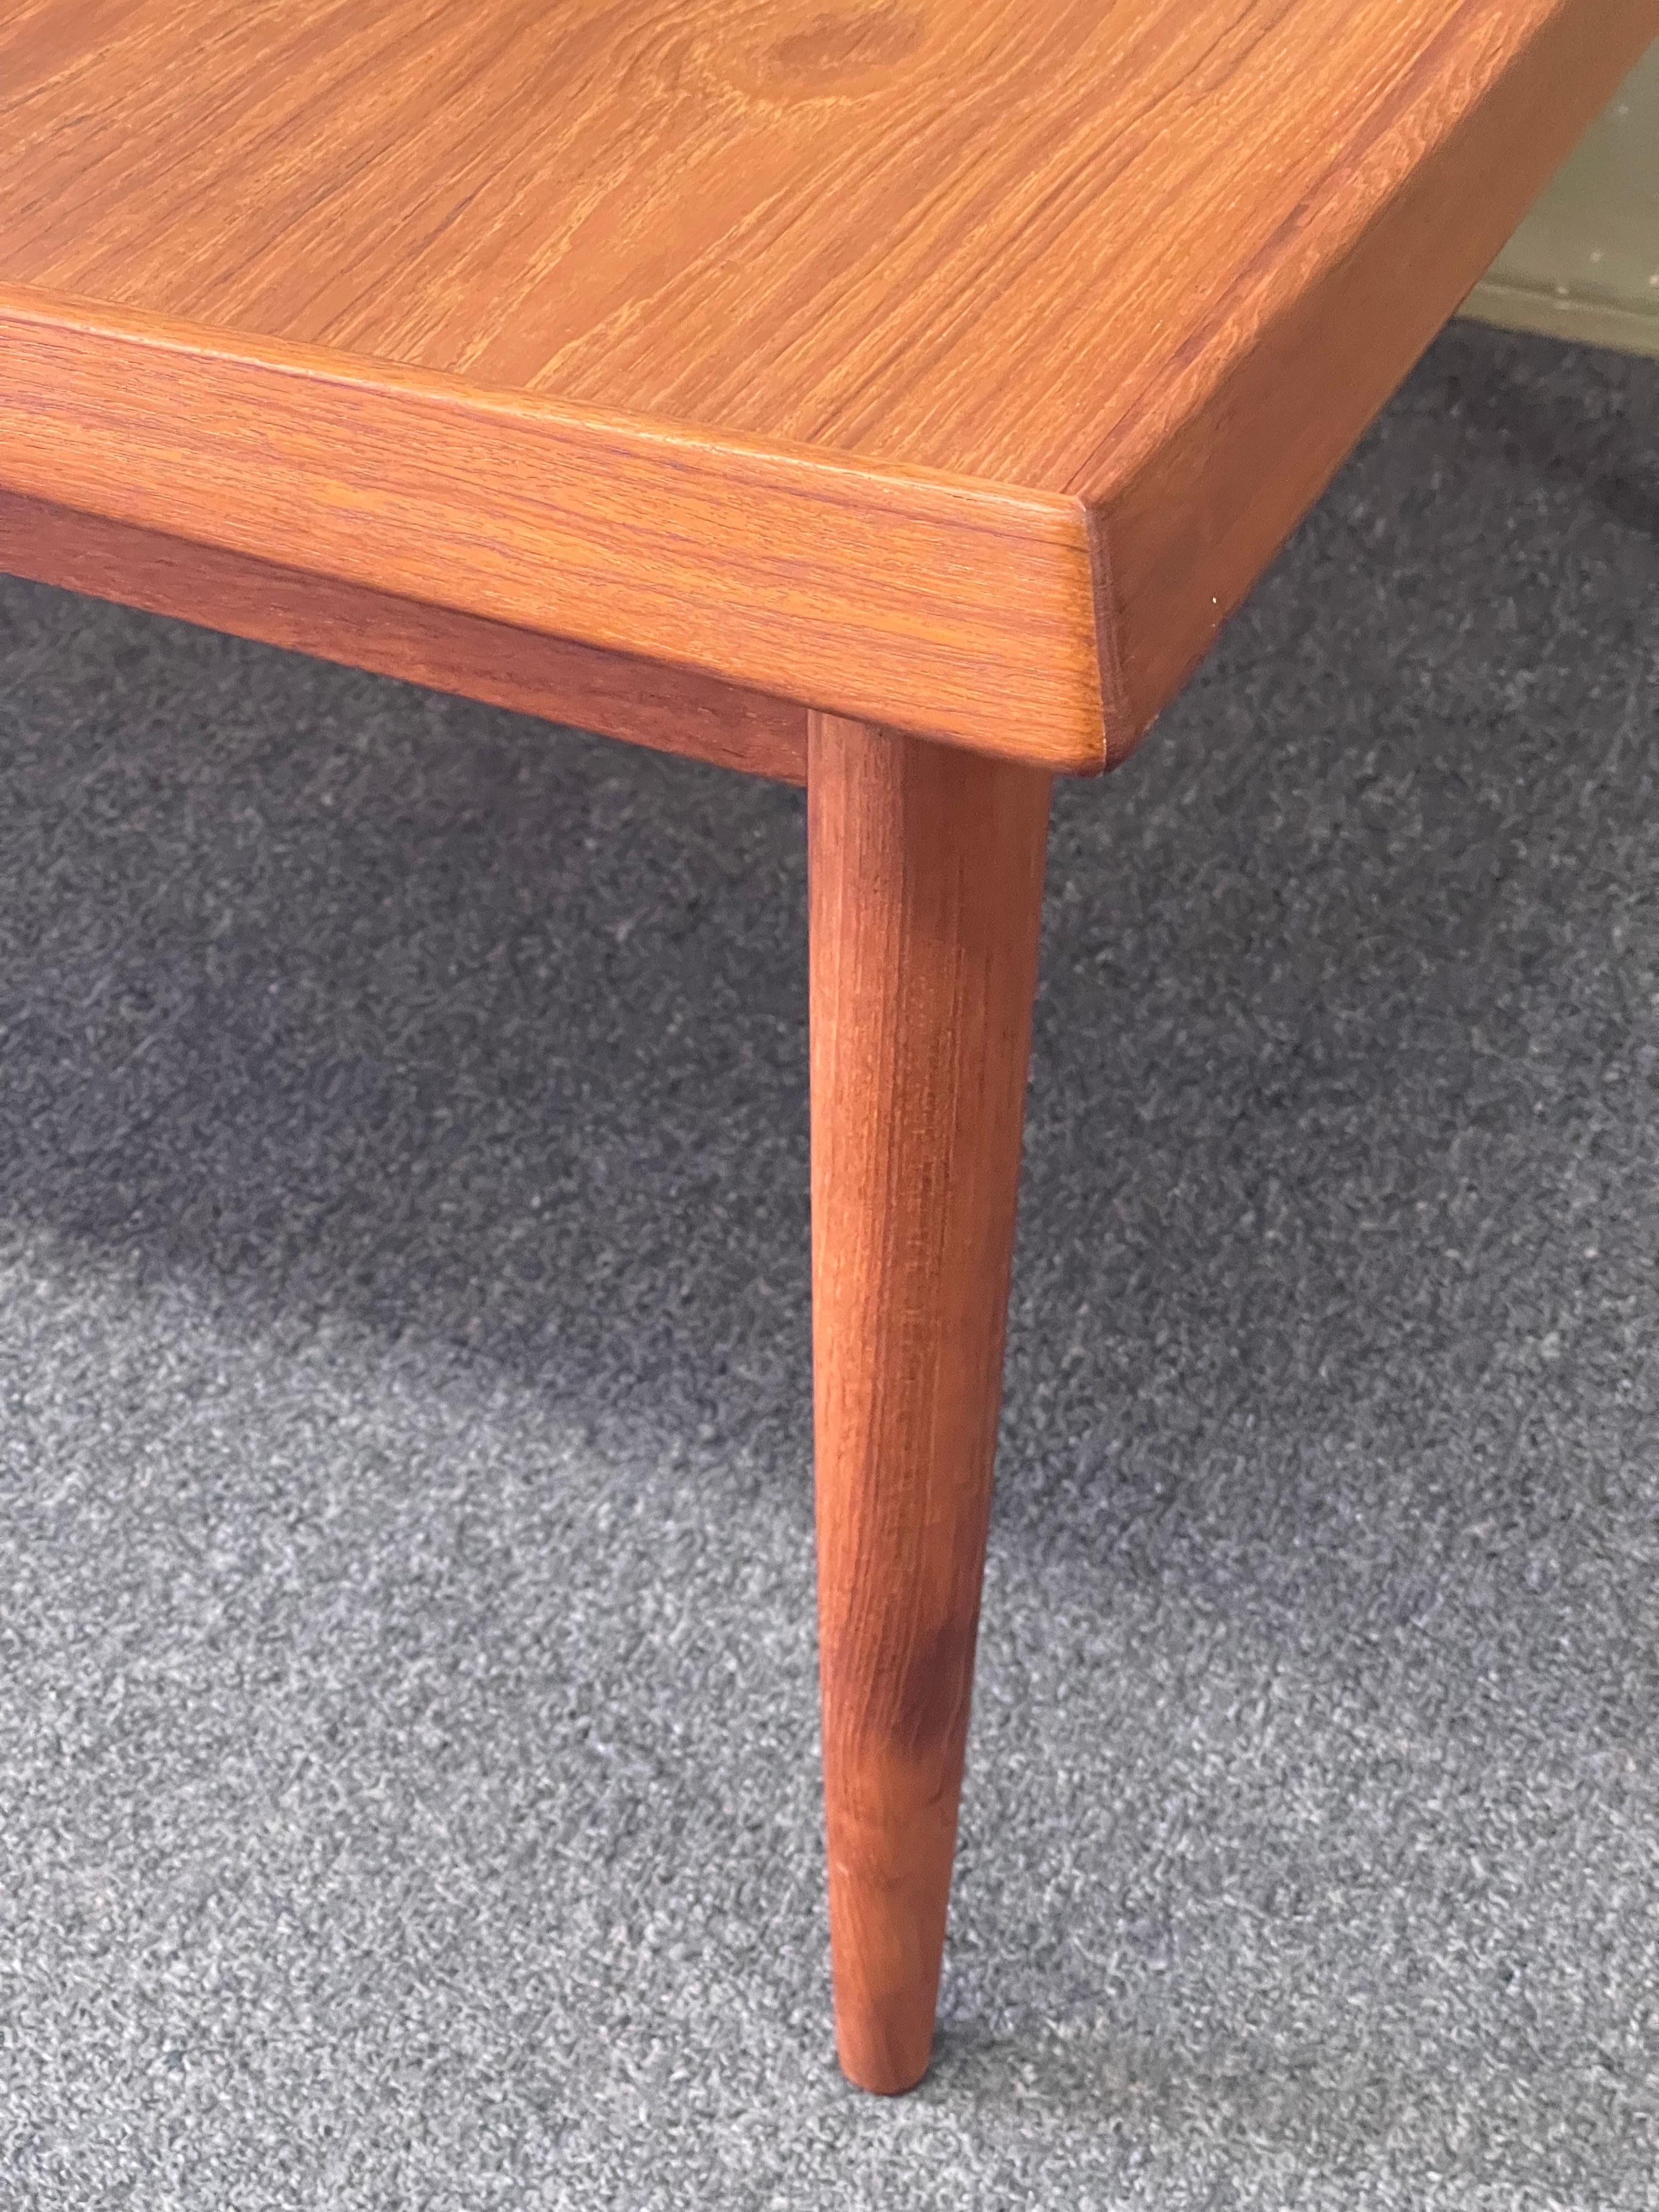 Danish Modern Solid Teak Coffee Table by Moredo For Sale 2